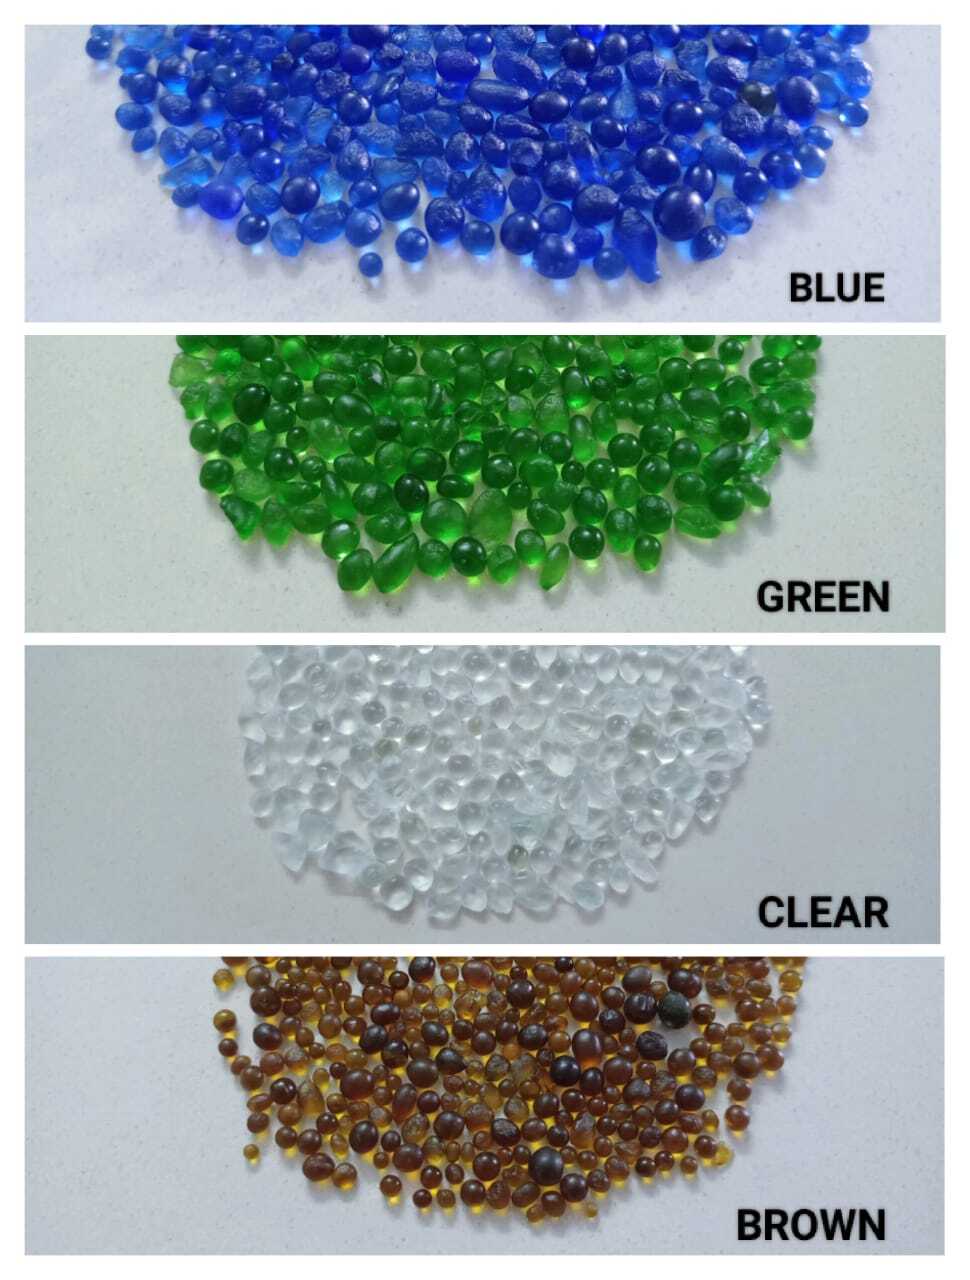 GREEN GLASS ROUND AND SUPPER POLISHED PEBBLES AND CHIPS GRAVELS GLASS STONE PEBBLES